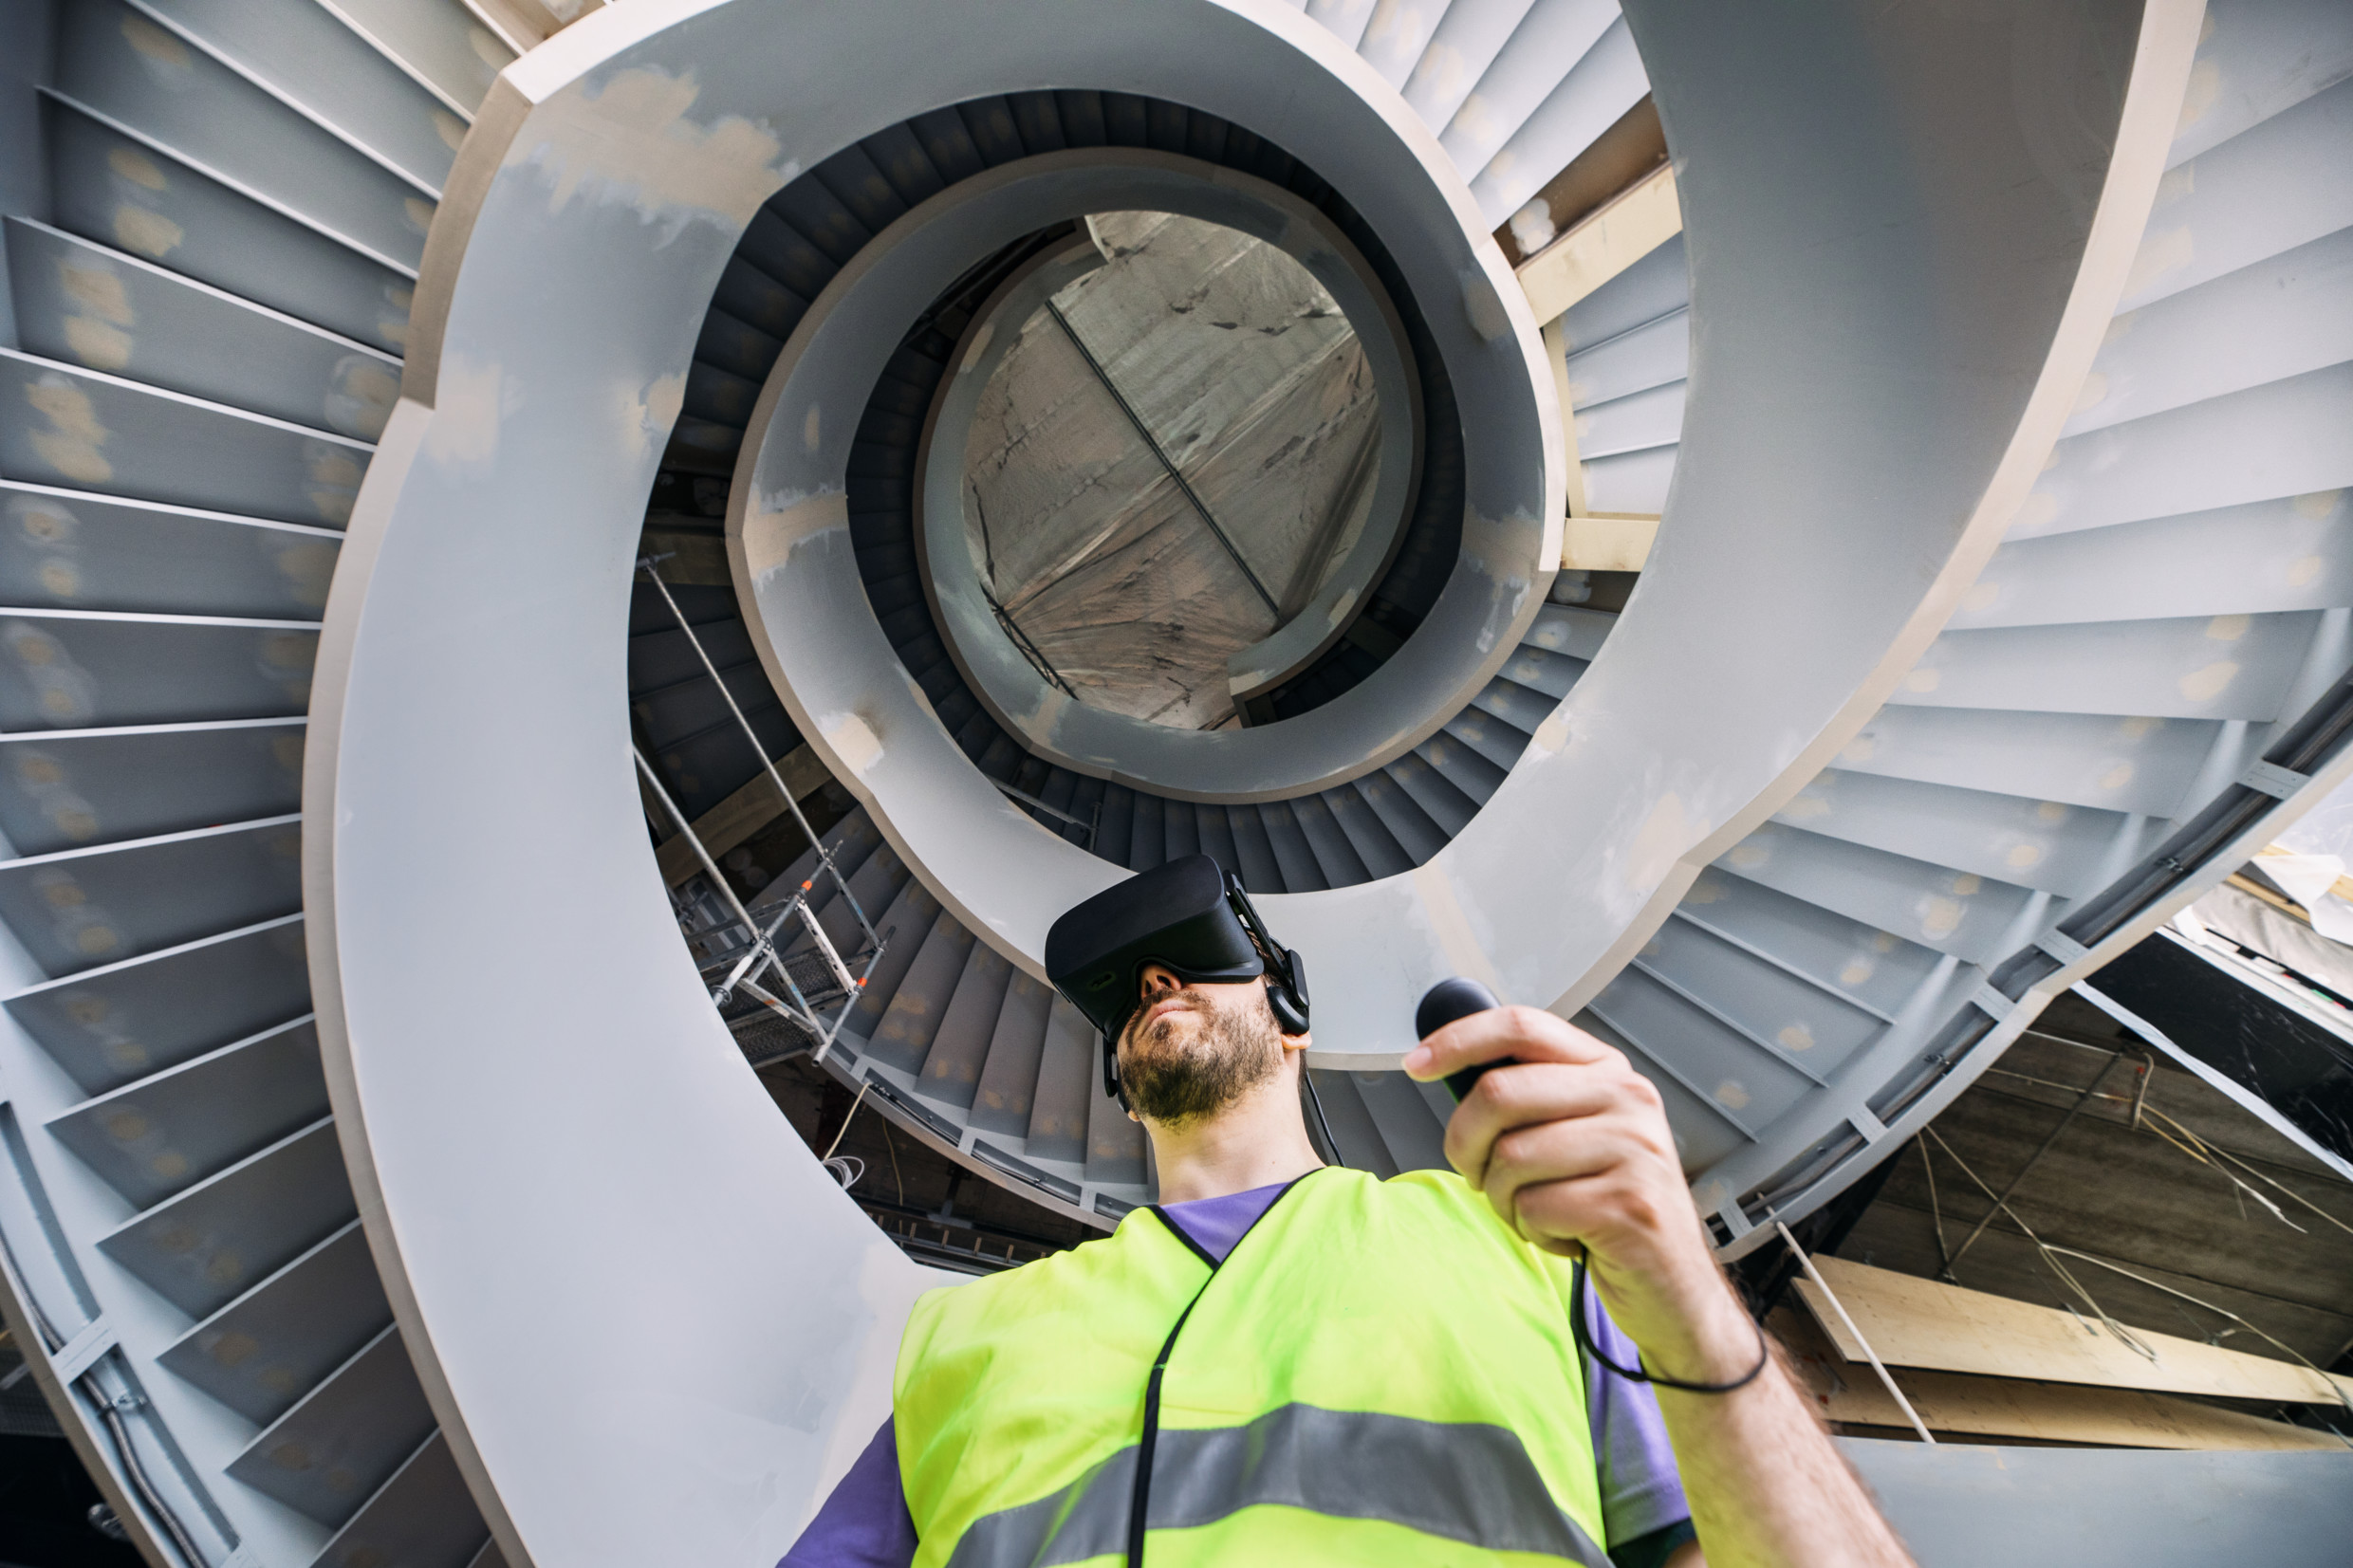 A bearded person wearing a VR headset and a safety reflector vest in the middle of a circular staircase